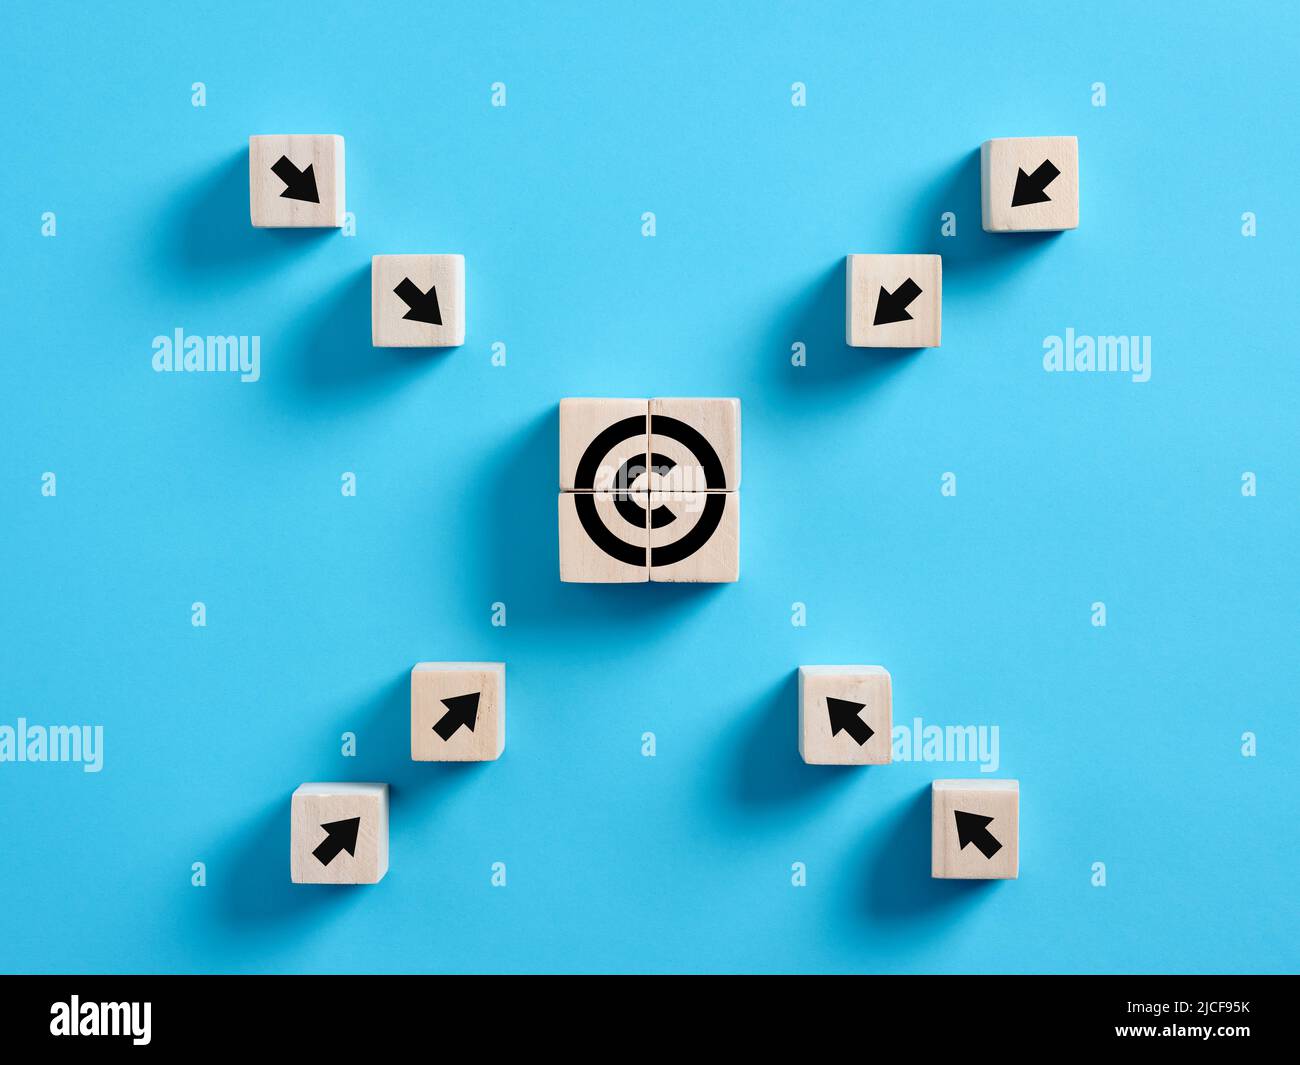 Arrows pointing towards the copyright icon on wooden cube. Property rights and brand patent protection in business concept. Stock Photo